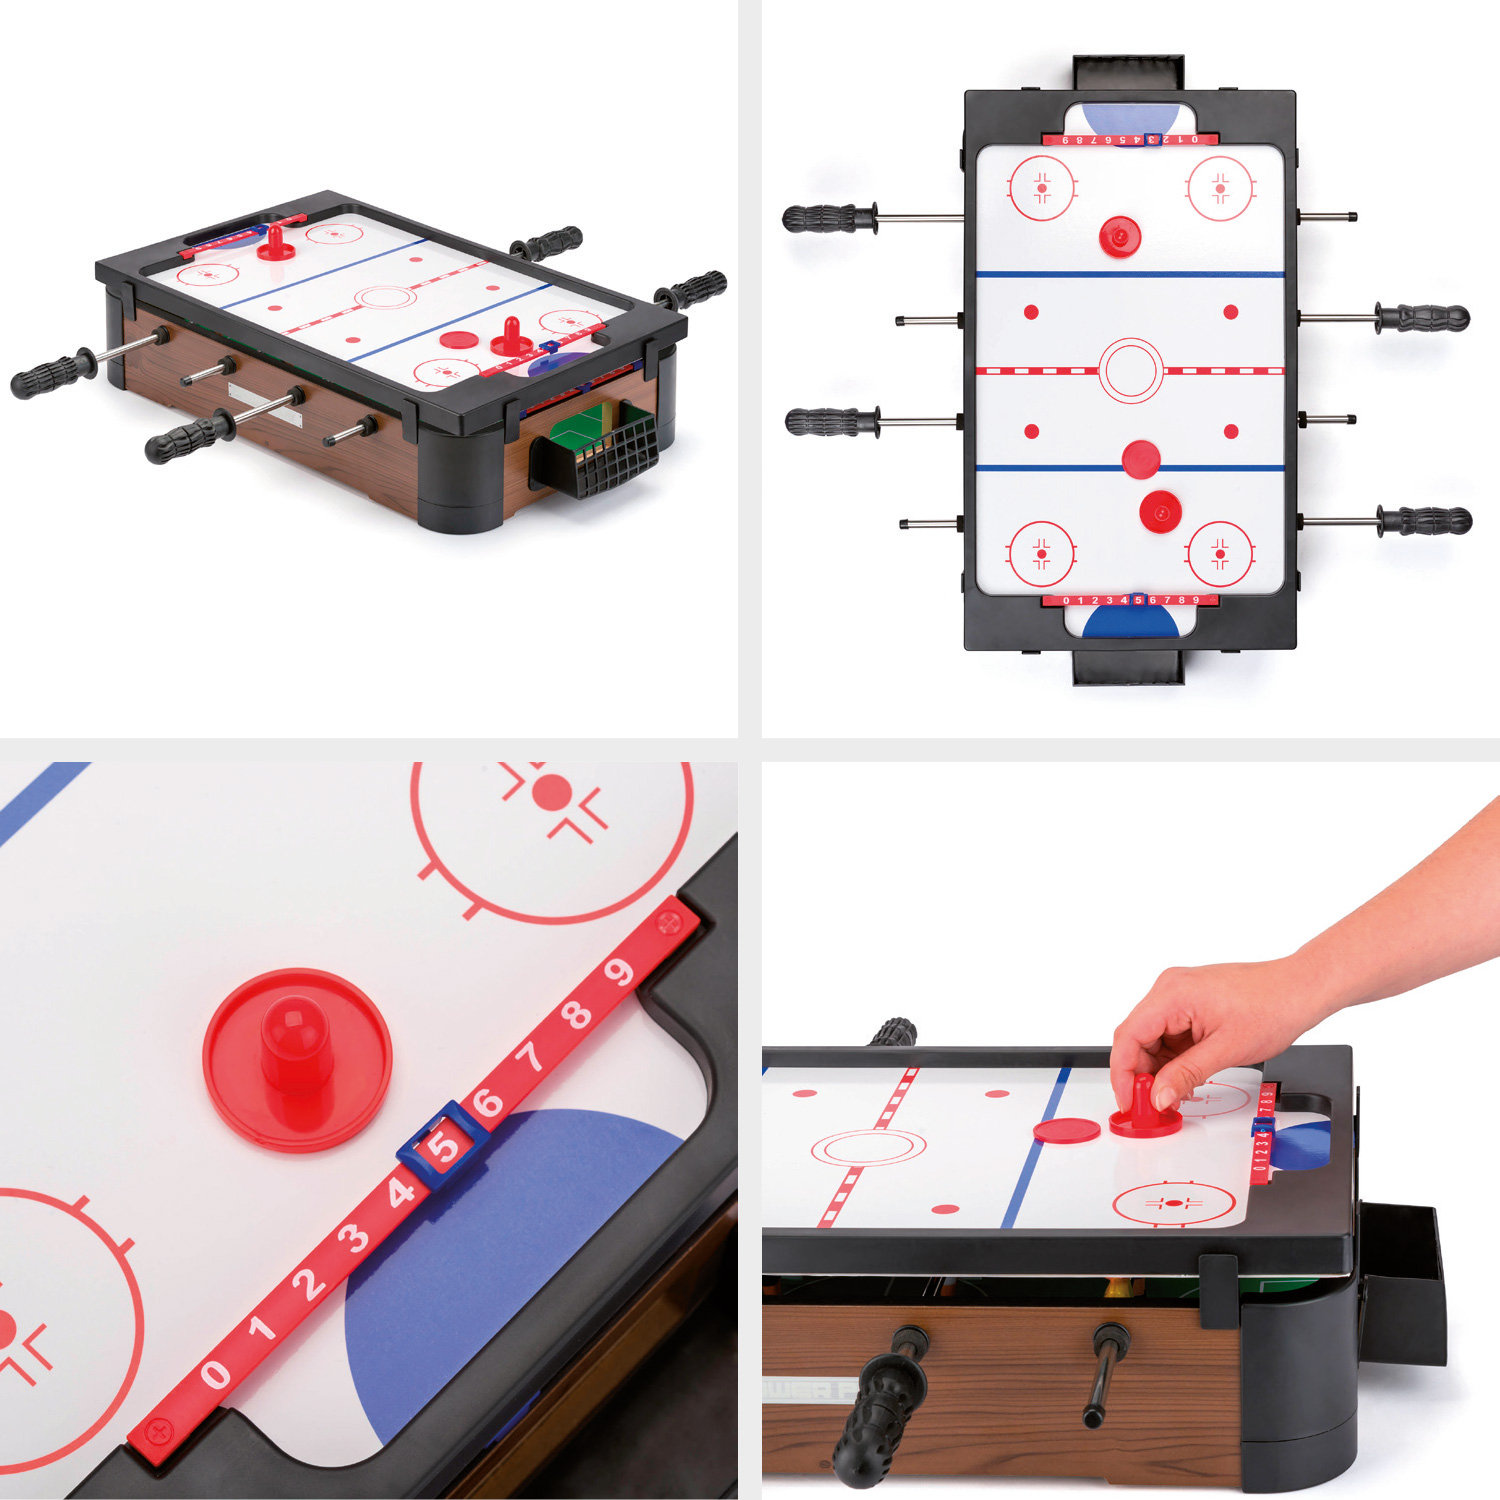 Toyrific 3-in-1 game table